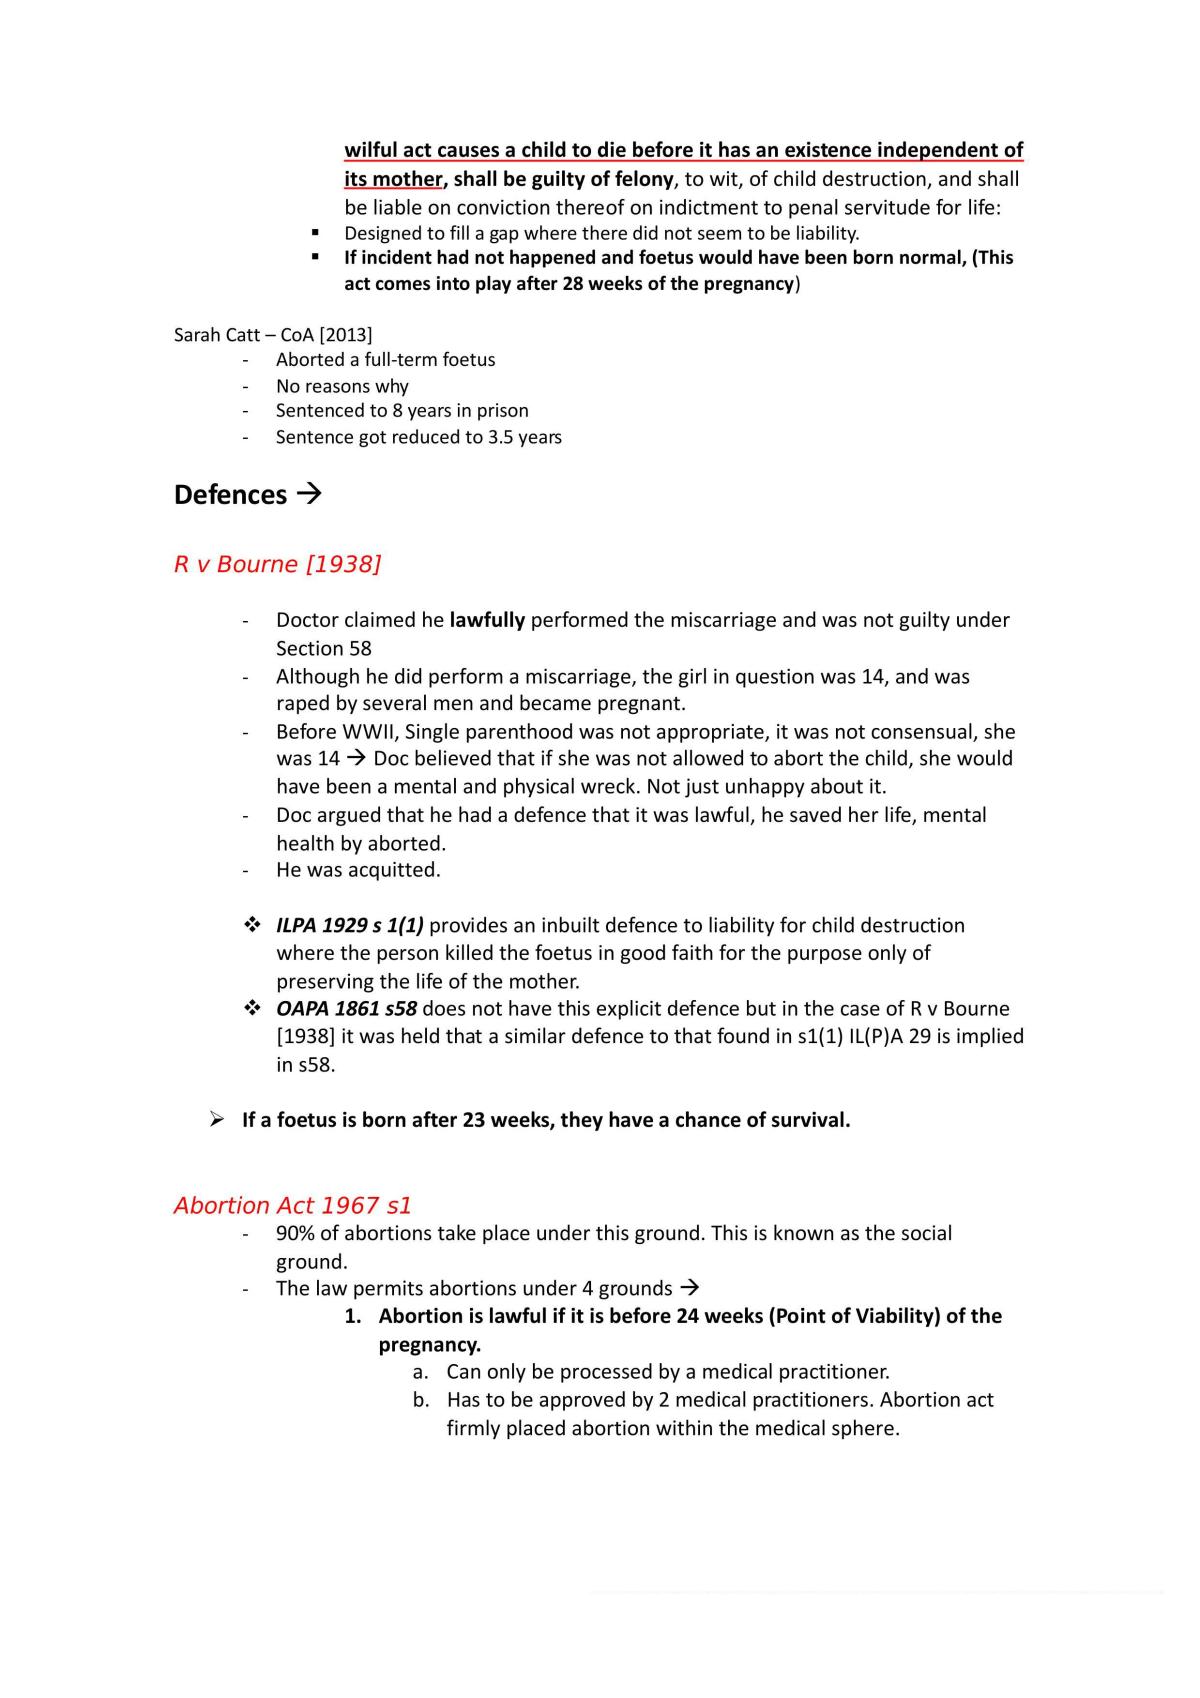 Medicine and the Law Exam Notes - Page 41